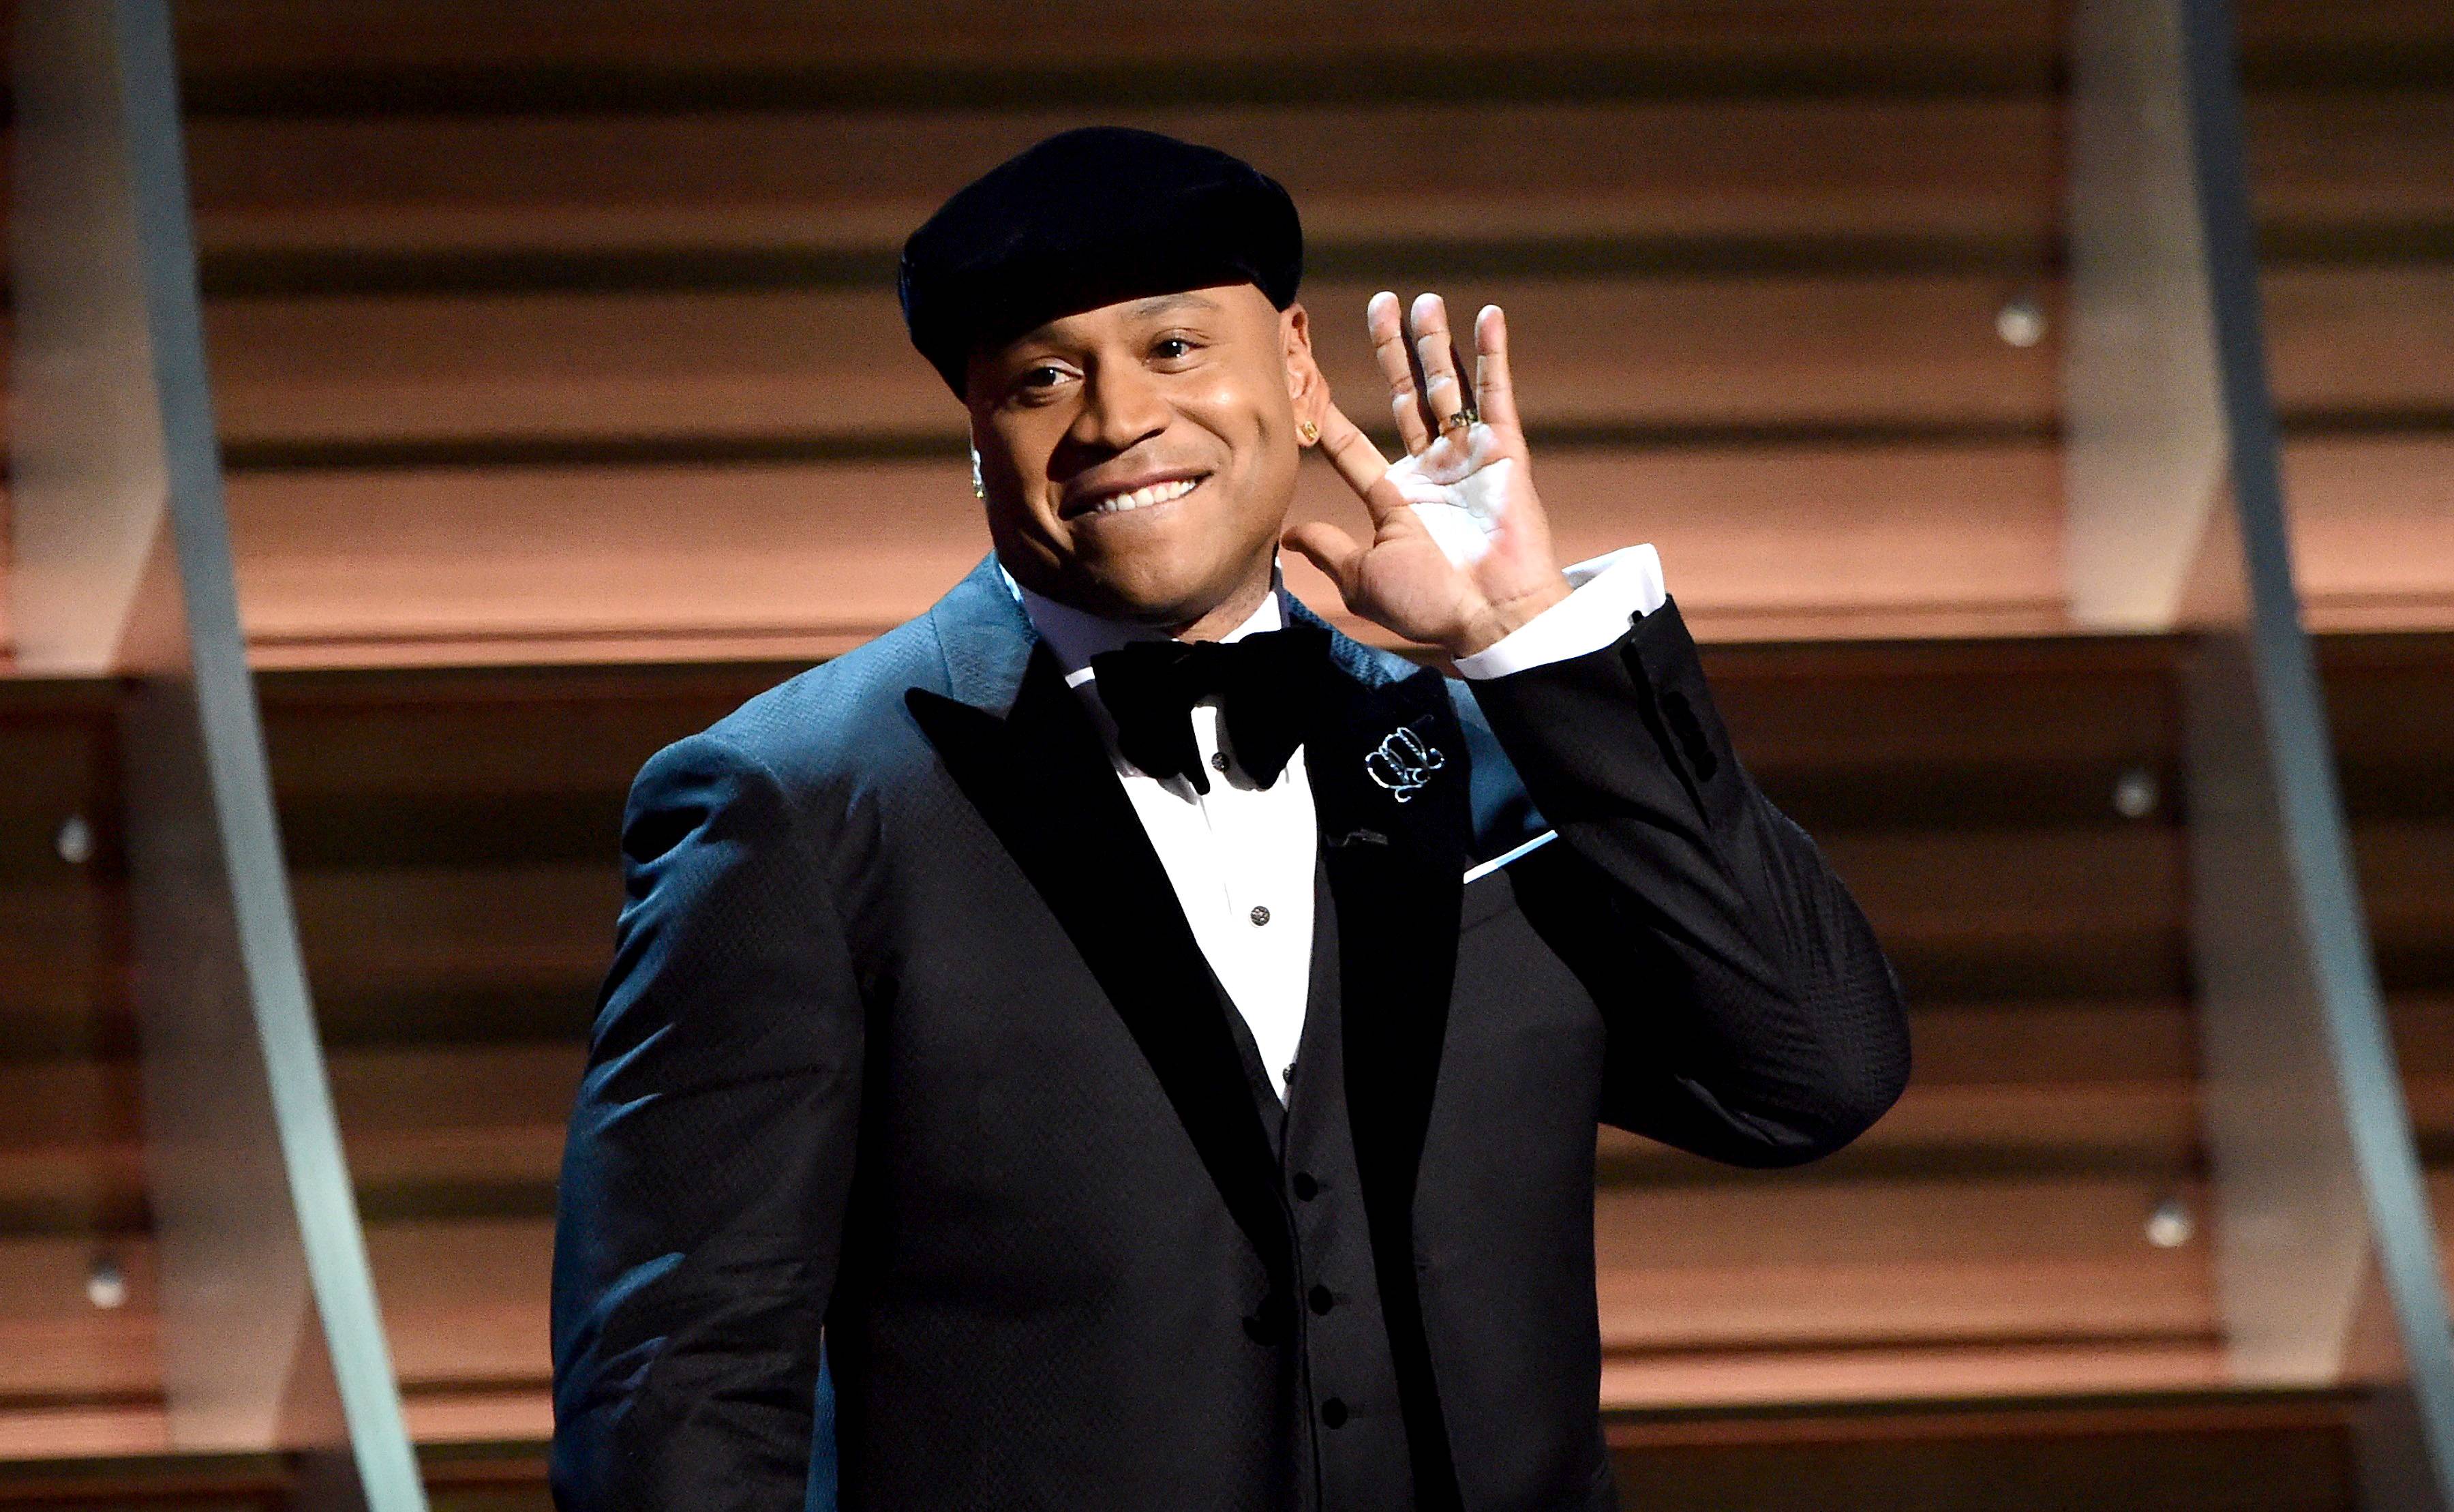 The 2016 GRAMMY Awards - The award show that's all about music excellence went all out in pairing performers that would get us talking. LL Cool J, of course, took his hosting duties like the seasoned pro he always is. We got an incredible performance by Kendrick Lamar and other artists. Sadly, we were also reminded of how many great artists we lost over the year with many tribute performances. Come with us as we remember Grammy 2016 night. – Jon Reyes(Photo: Robyn Beck/AFP/Getty Images)